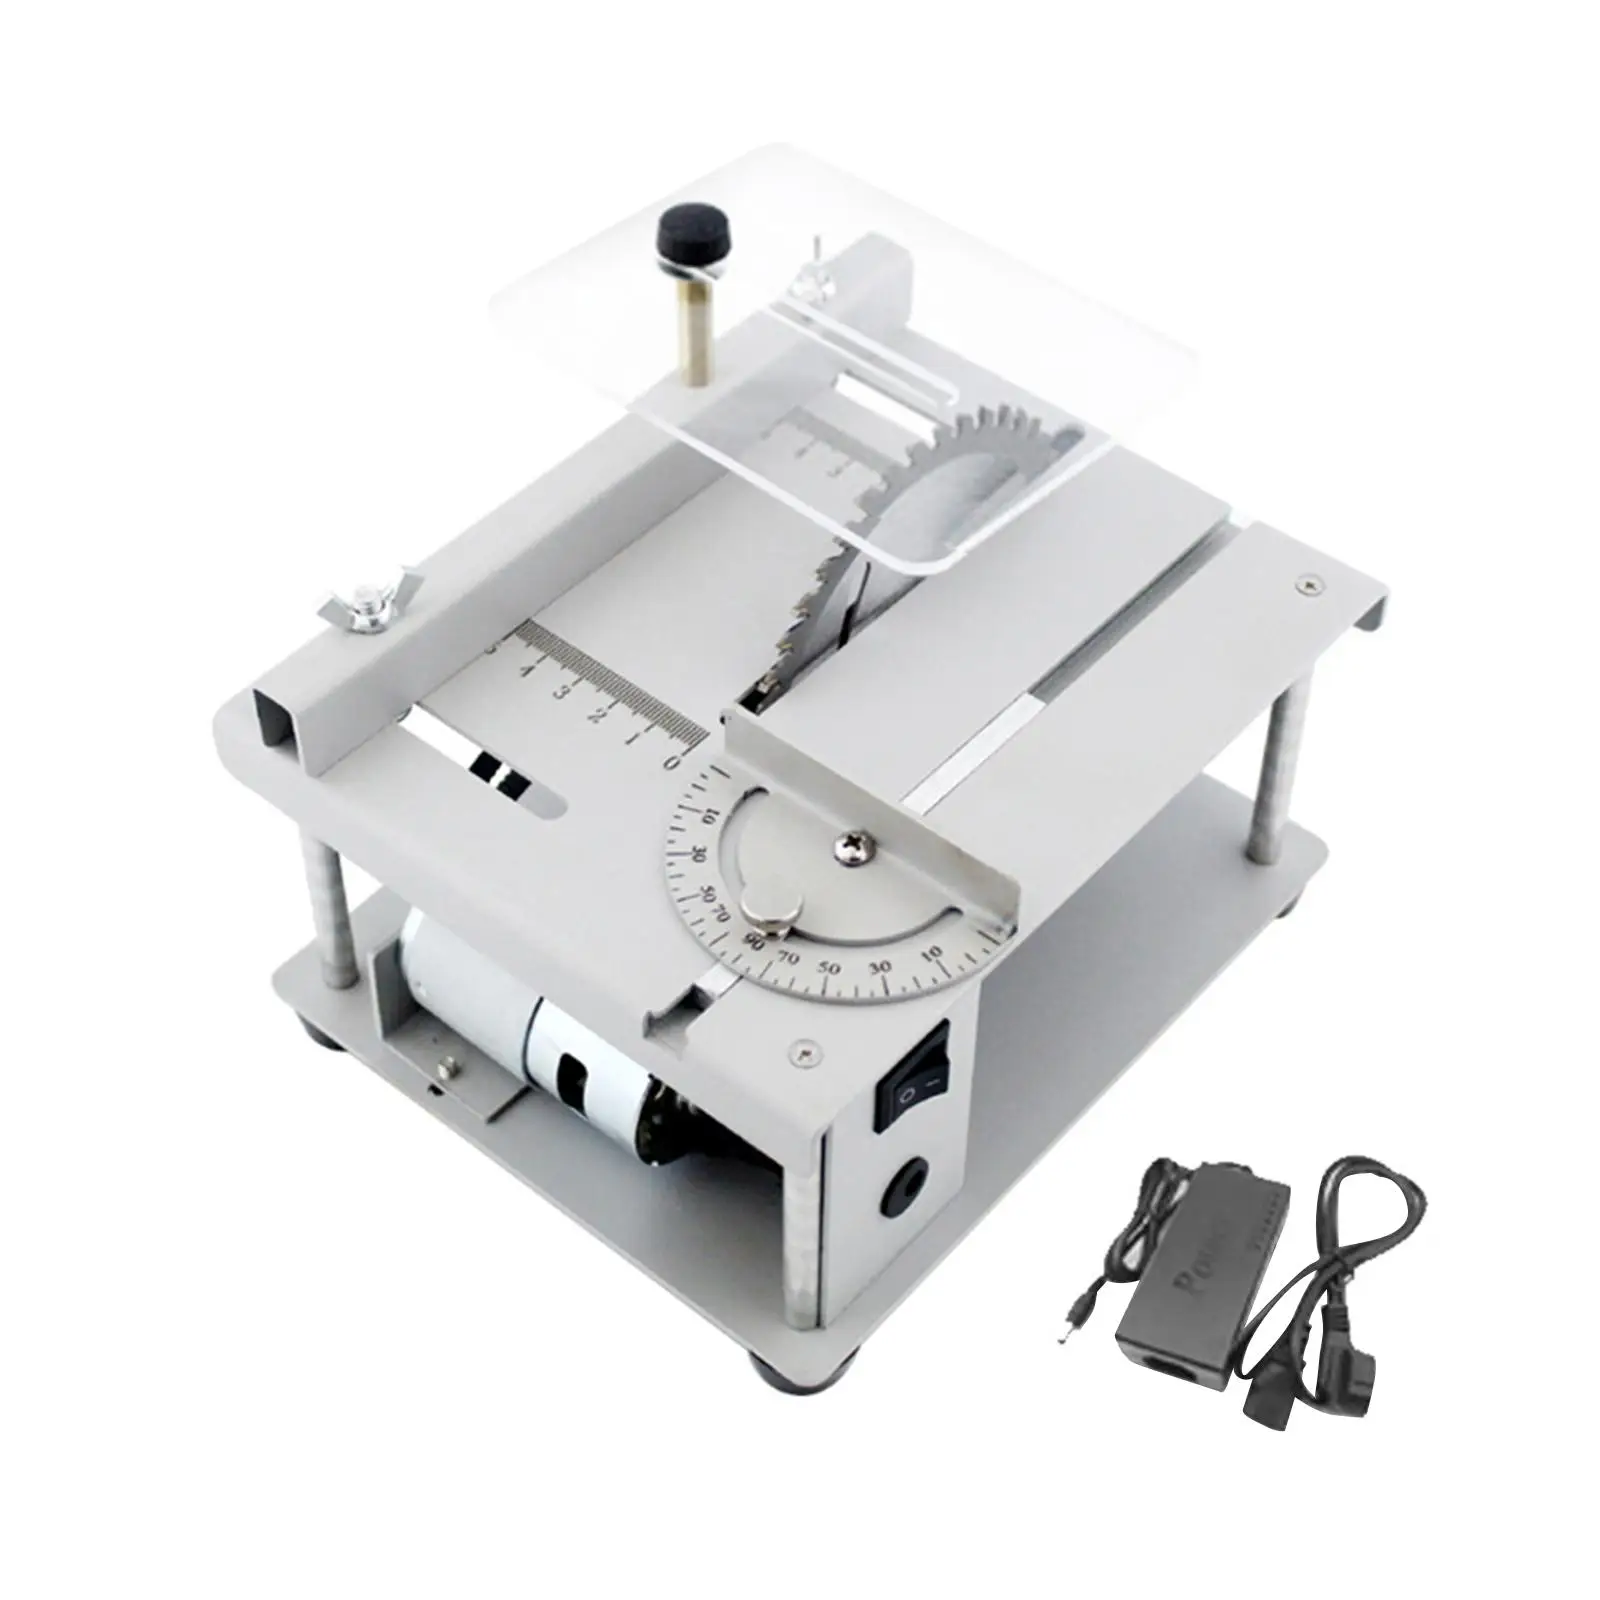 Mini Table Saw Portable Multifunctional Table Saw for Wood Miniatures Crafts